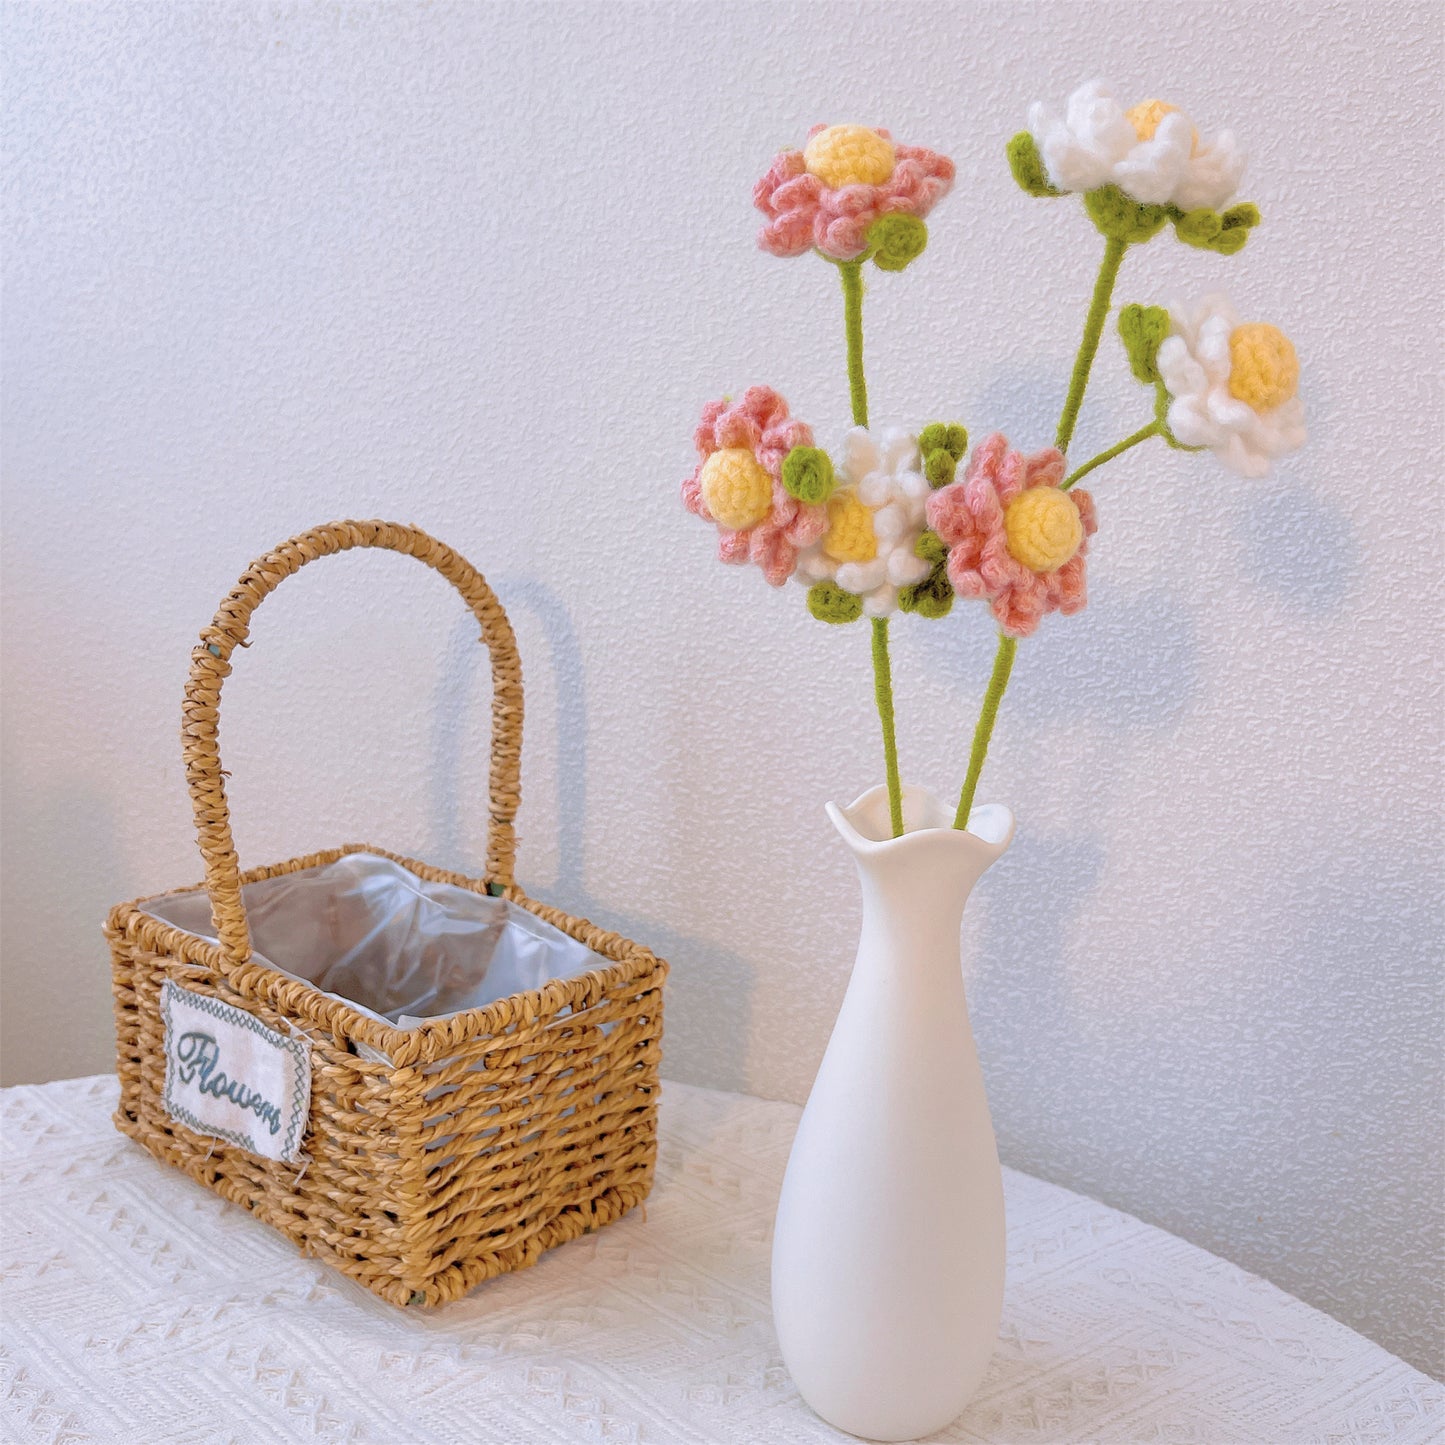 Serenity in Bloom: Handcrafted Crochet Chamomile Stake for a Calming Garden Decor